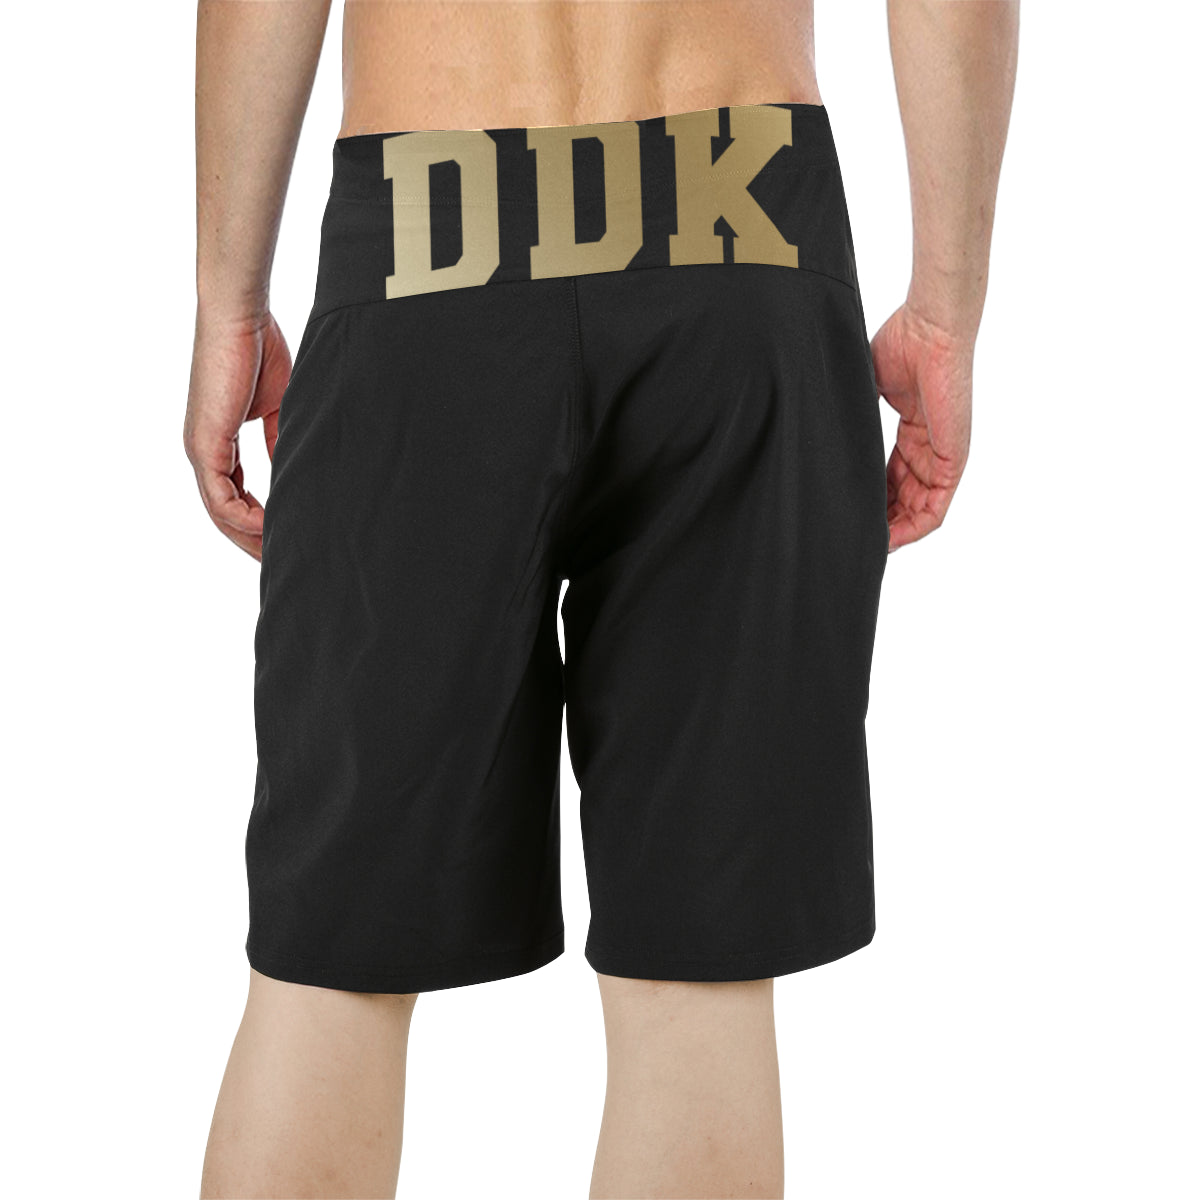 Black and Gold General Board Shorts